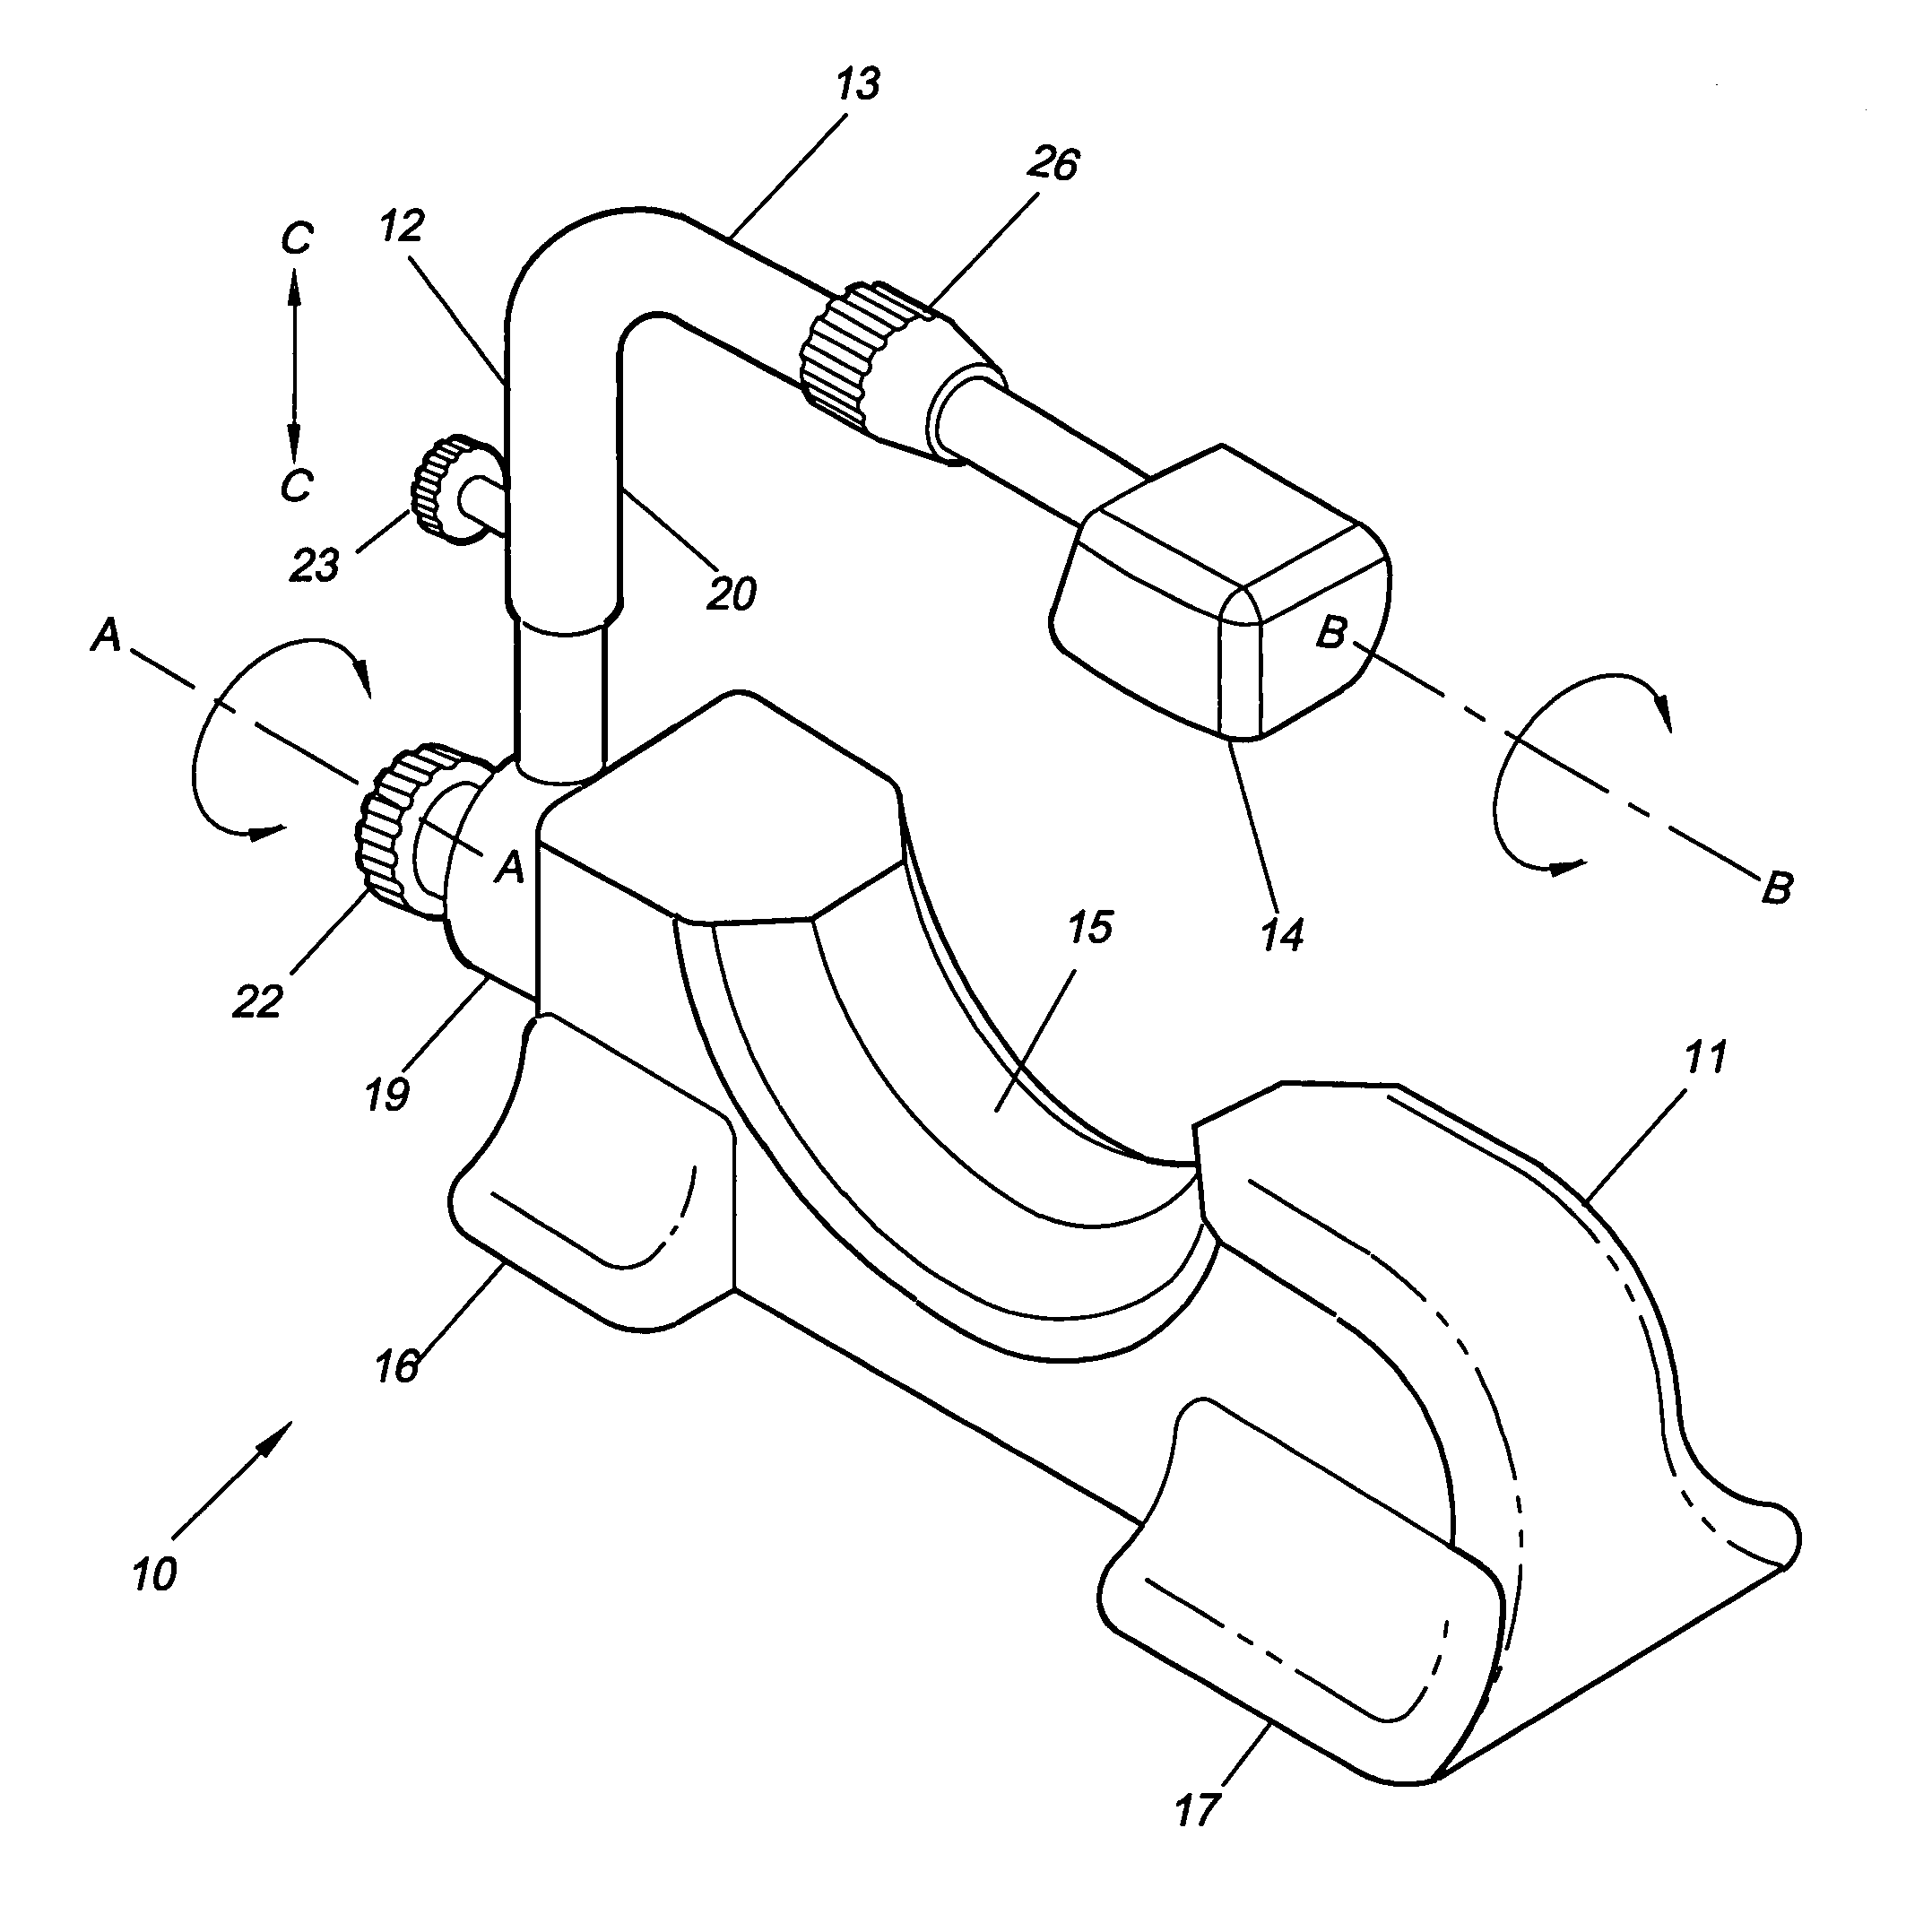 Device and method for maintaining an airway